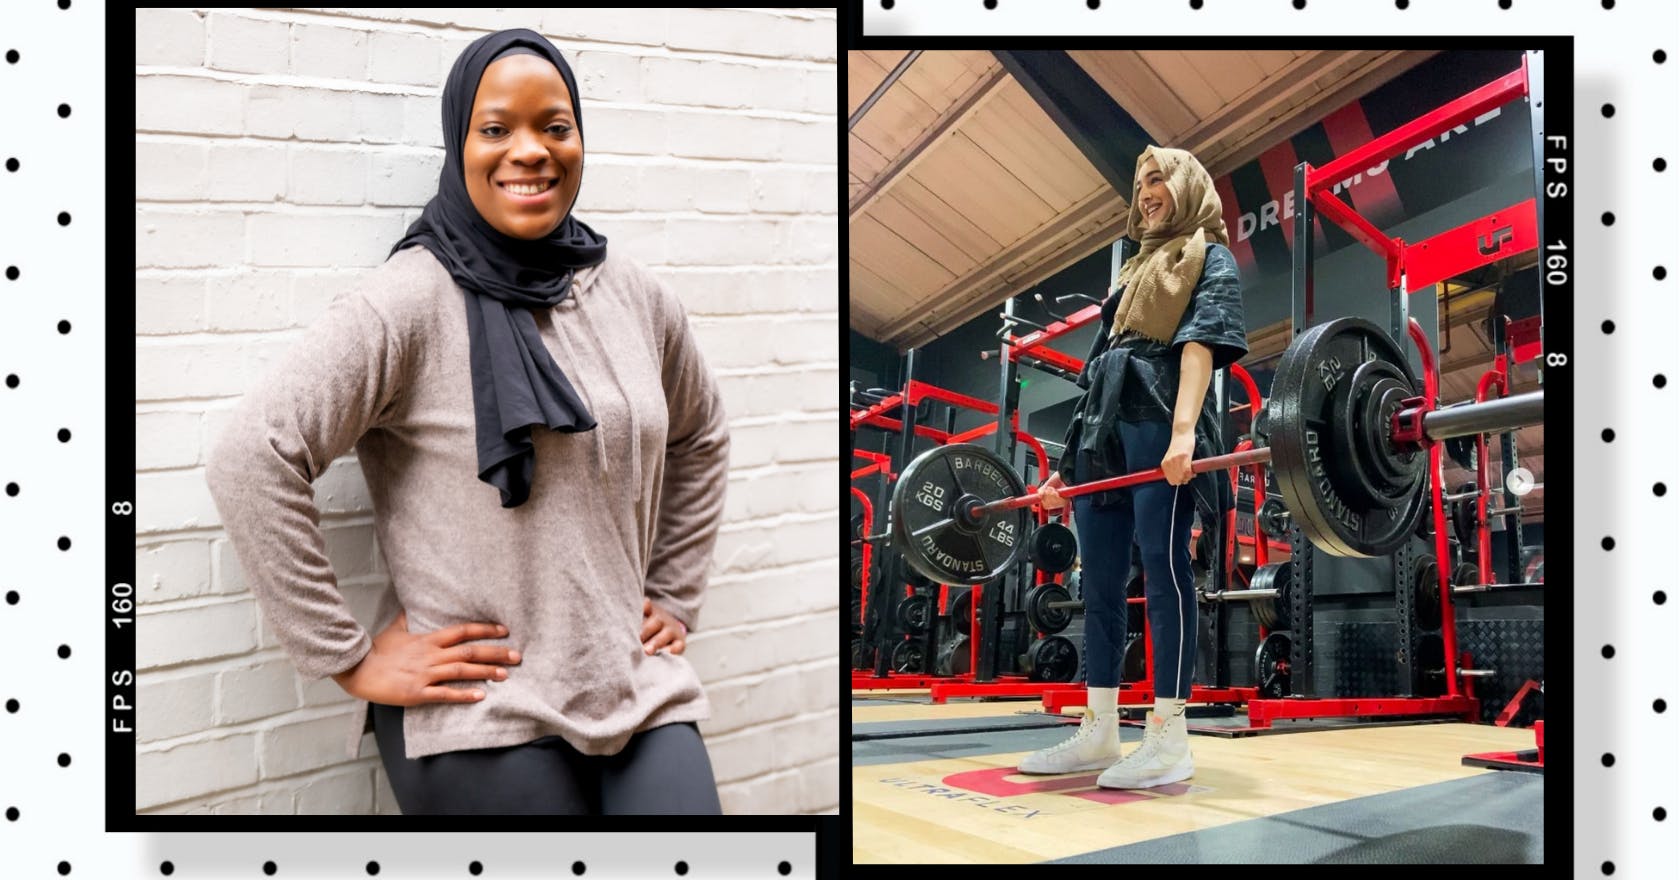 two fitness professionals on training while fasting